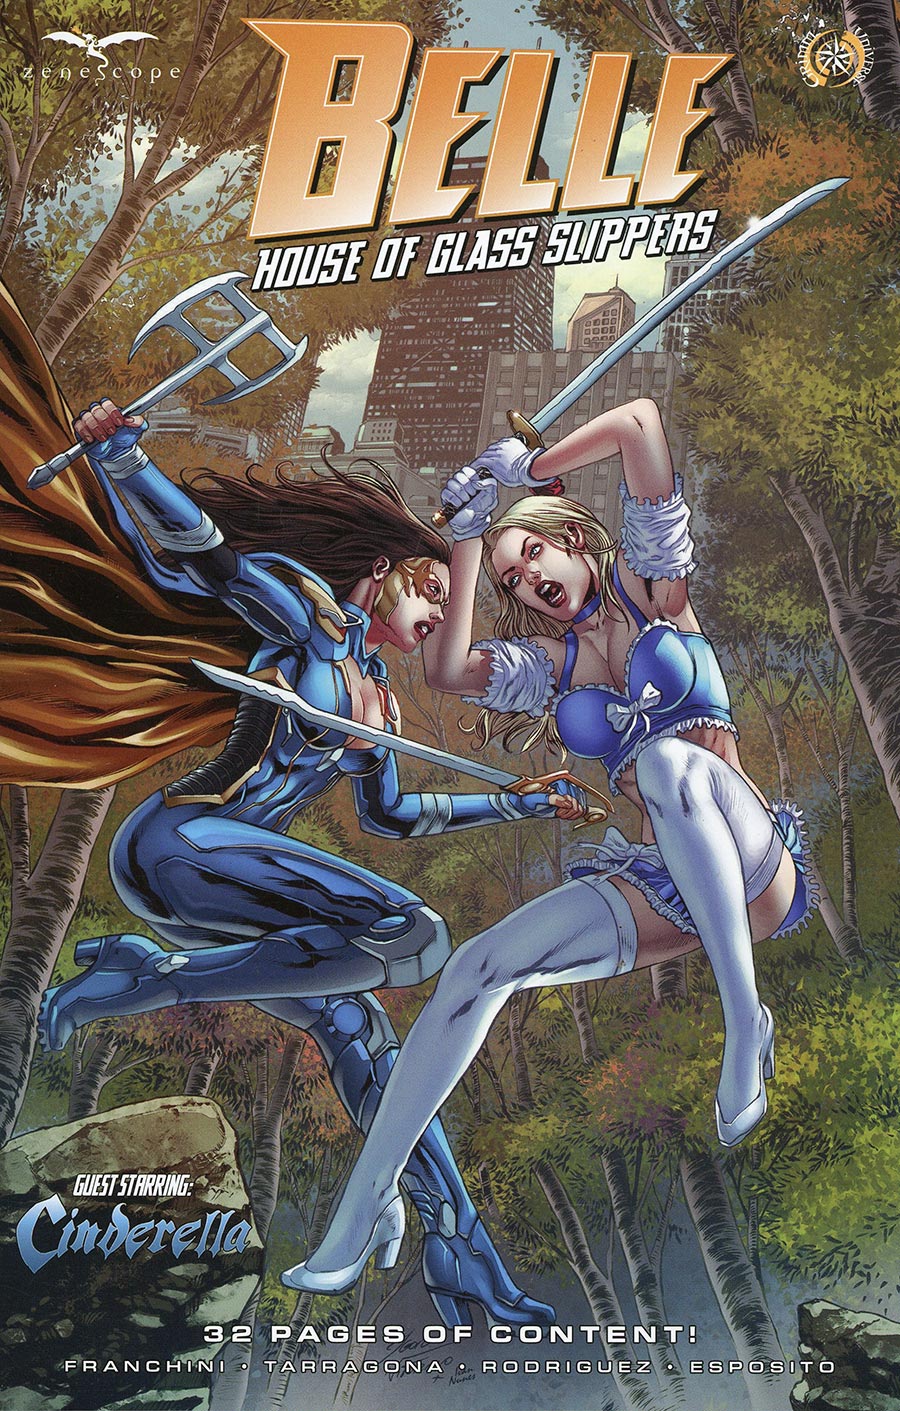 Grimm Fairy Tales Presents Belle House Of Glass Slippers #1 (One Shot) Cover A Igor Vitorino